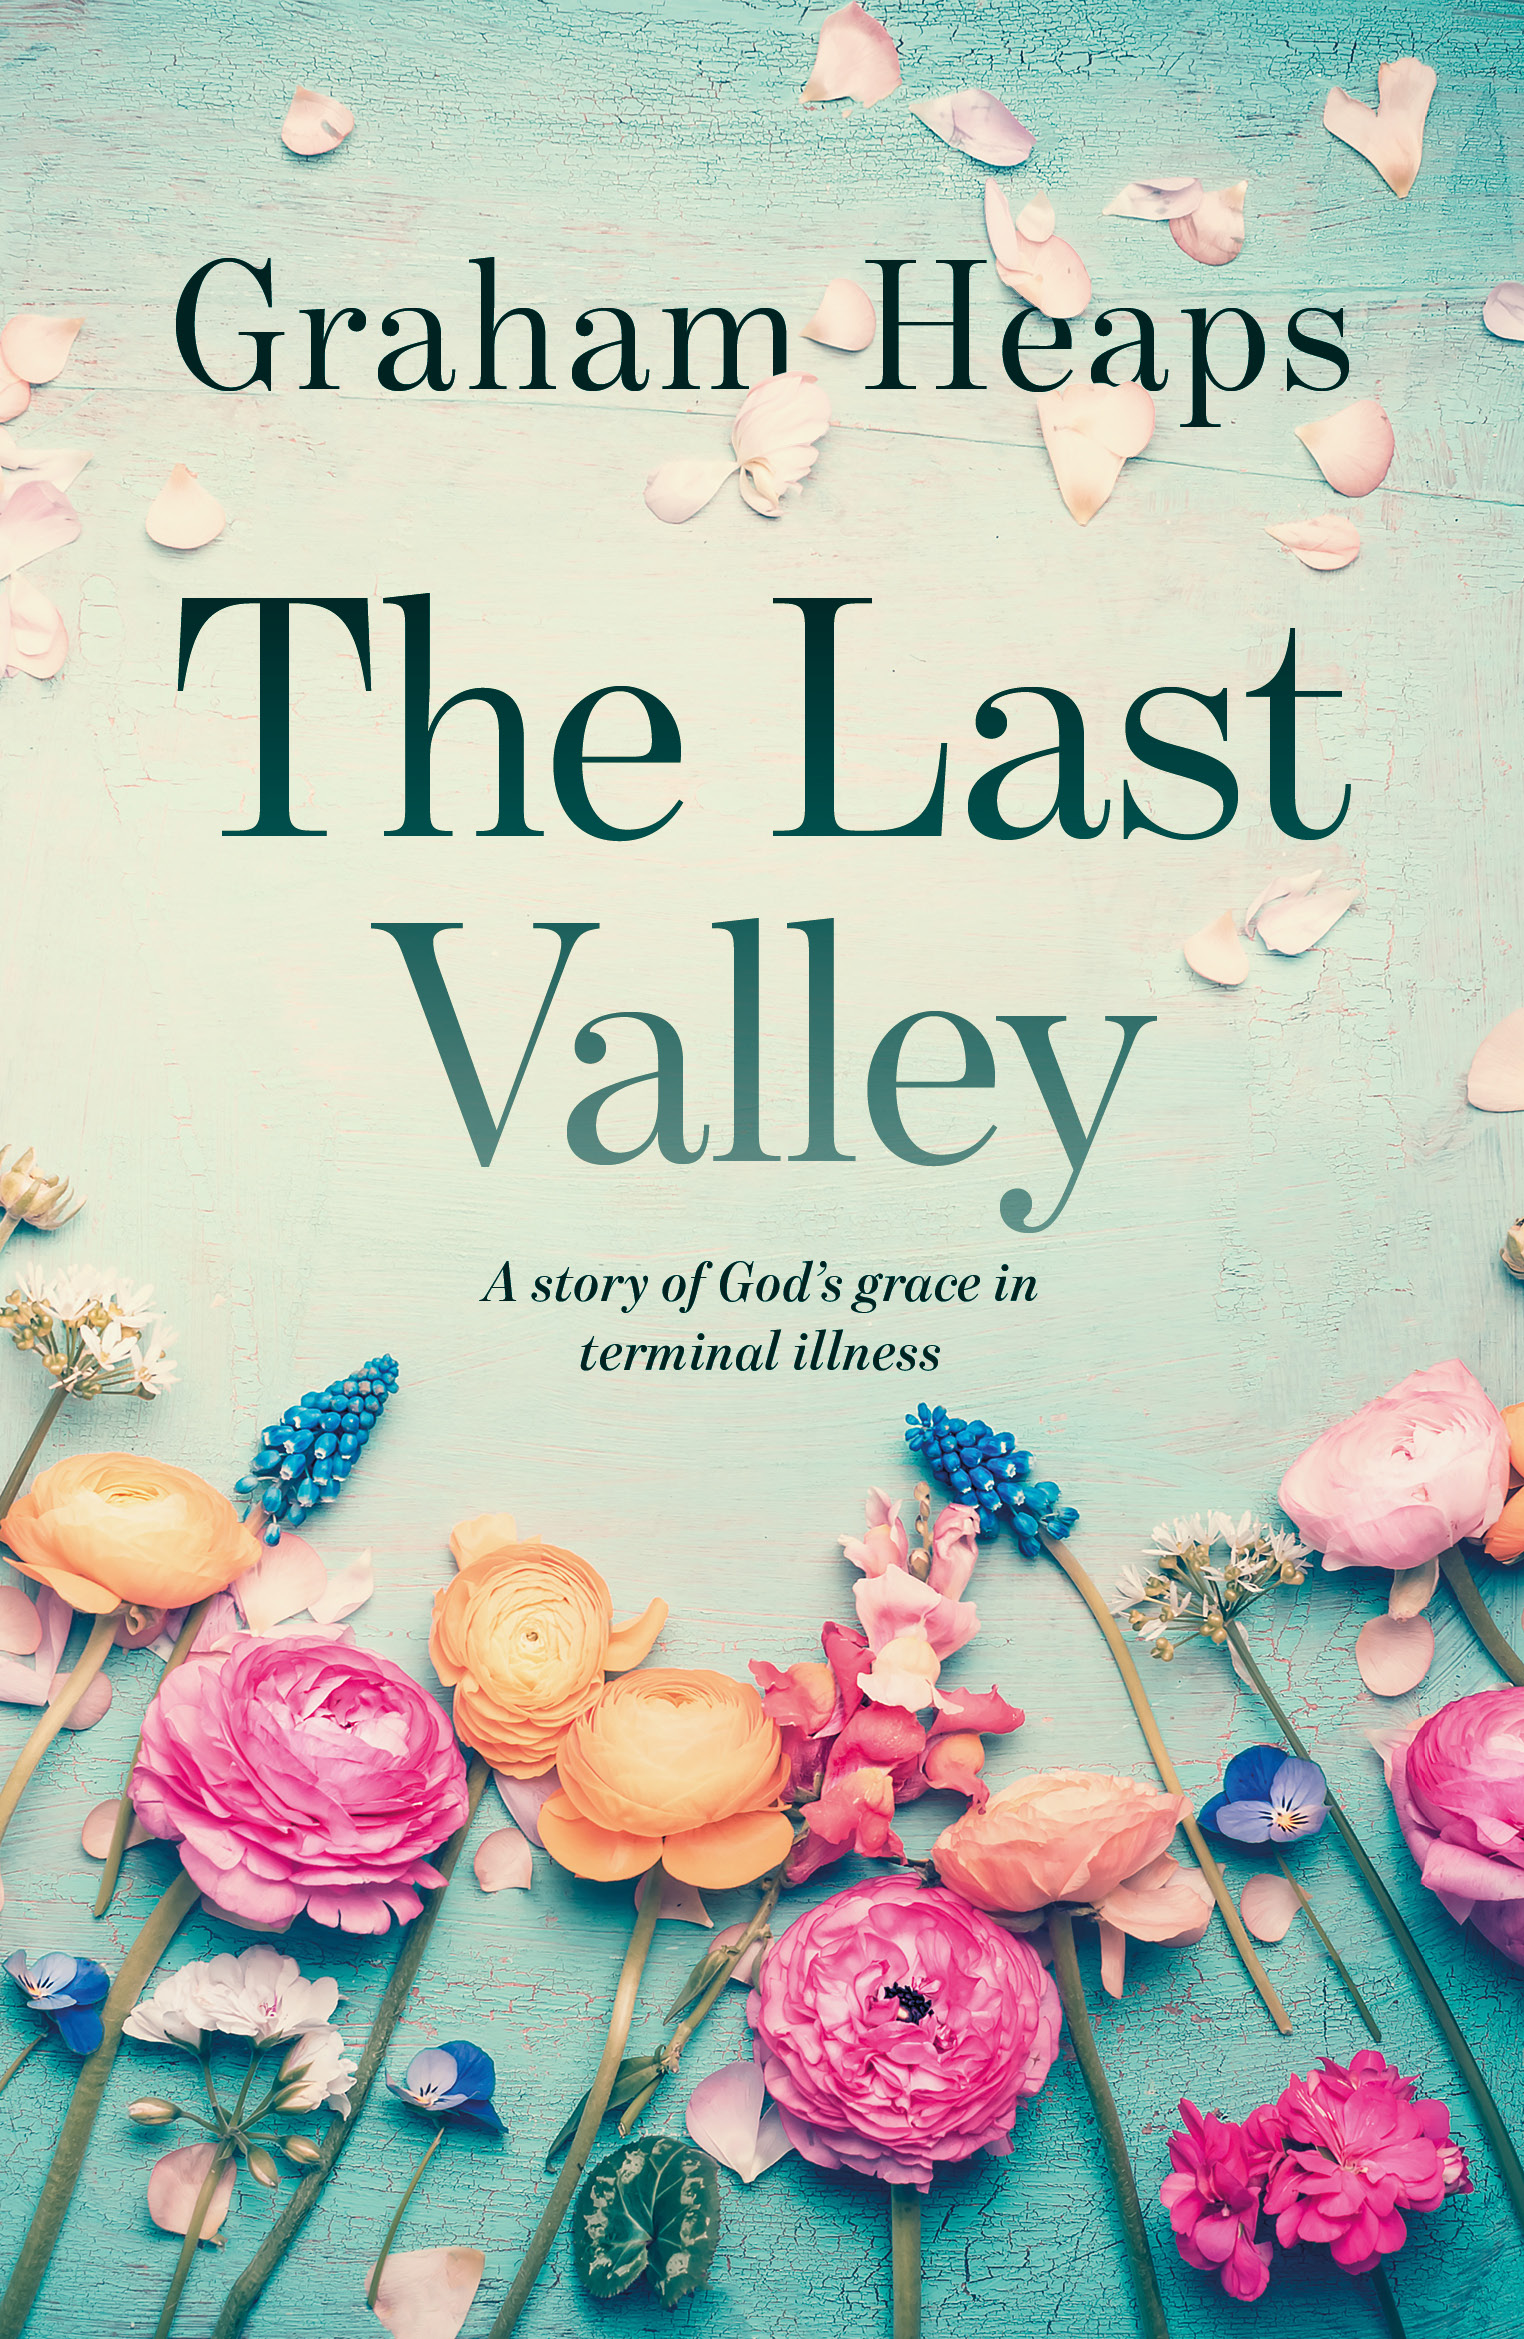 Book Notice: THE LAST VALLEY: A STORY OF GOD’S GRACE IN TERMINAL ILLNESS, by Graham Heaps